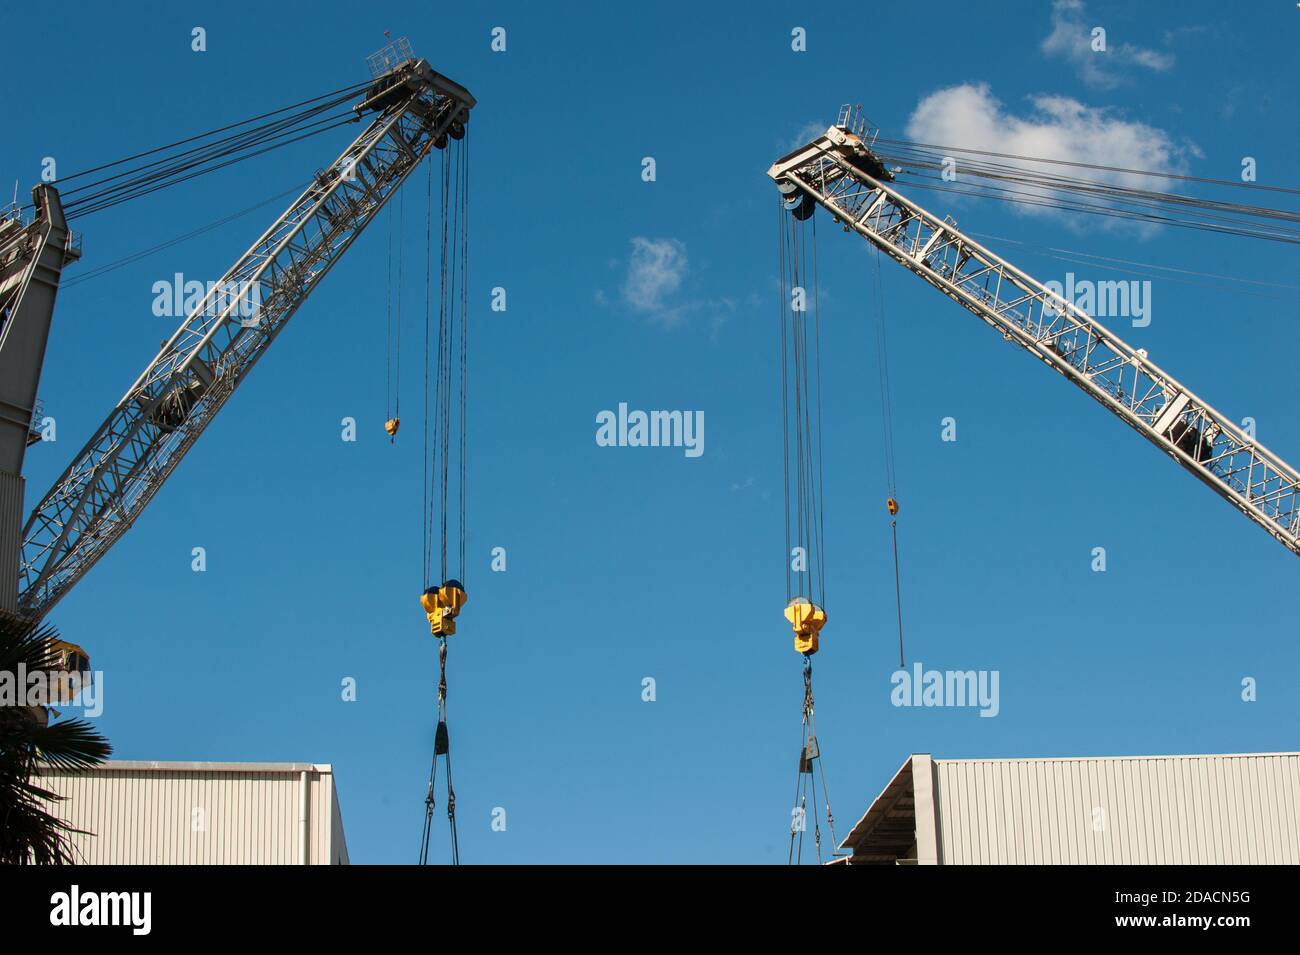 View on Fincantieri shipyard with cranes, coils, from Castellamare di Stabia, Naples Stock Photo